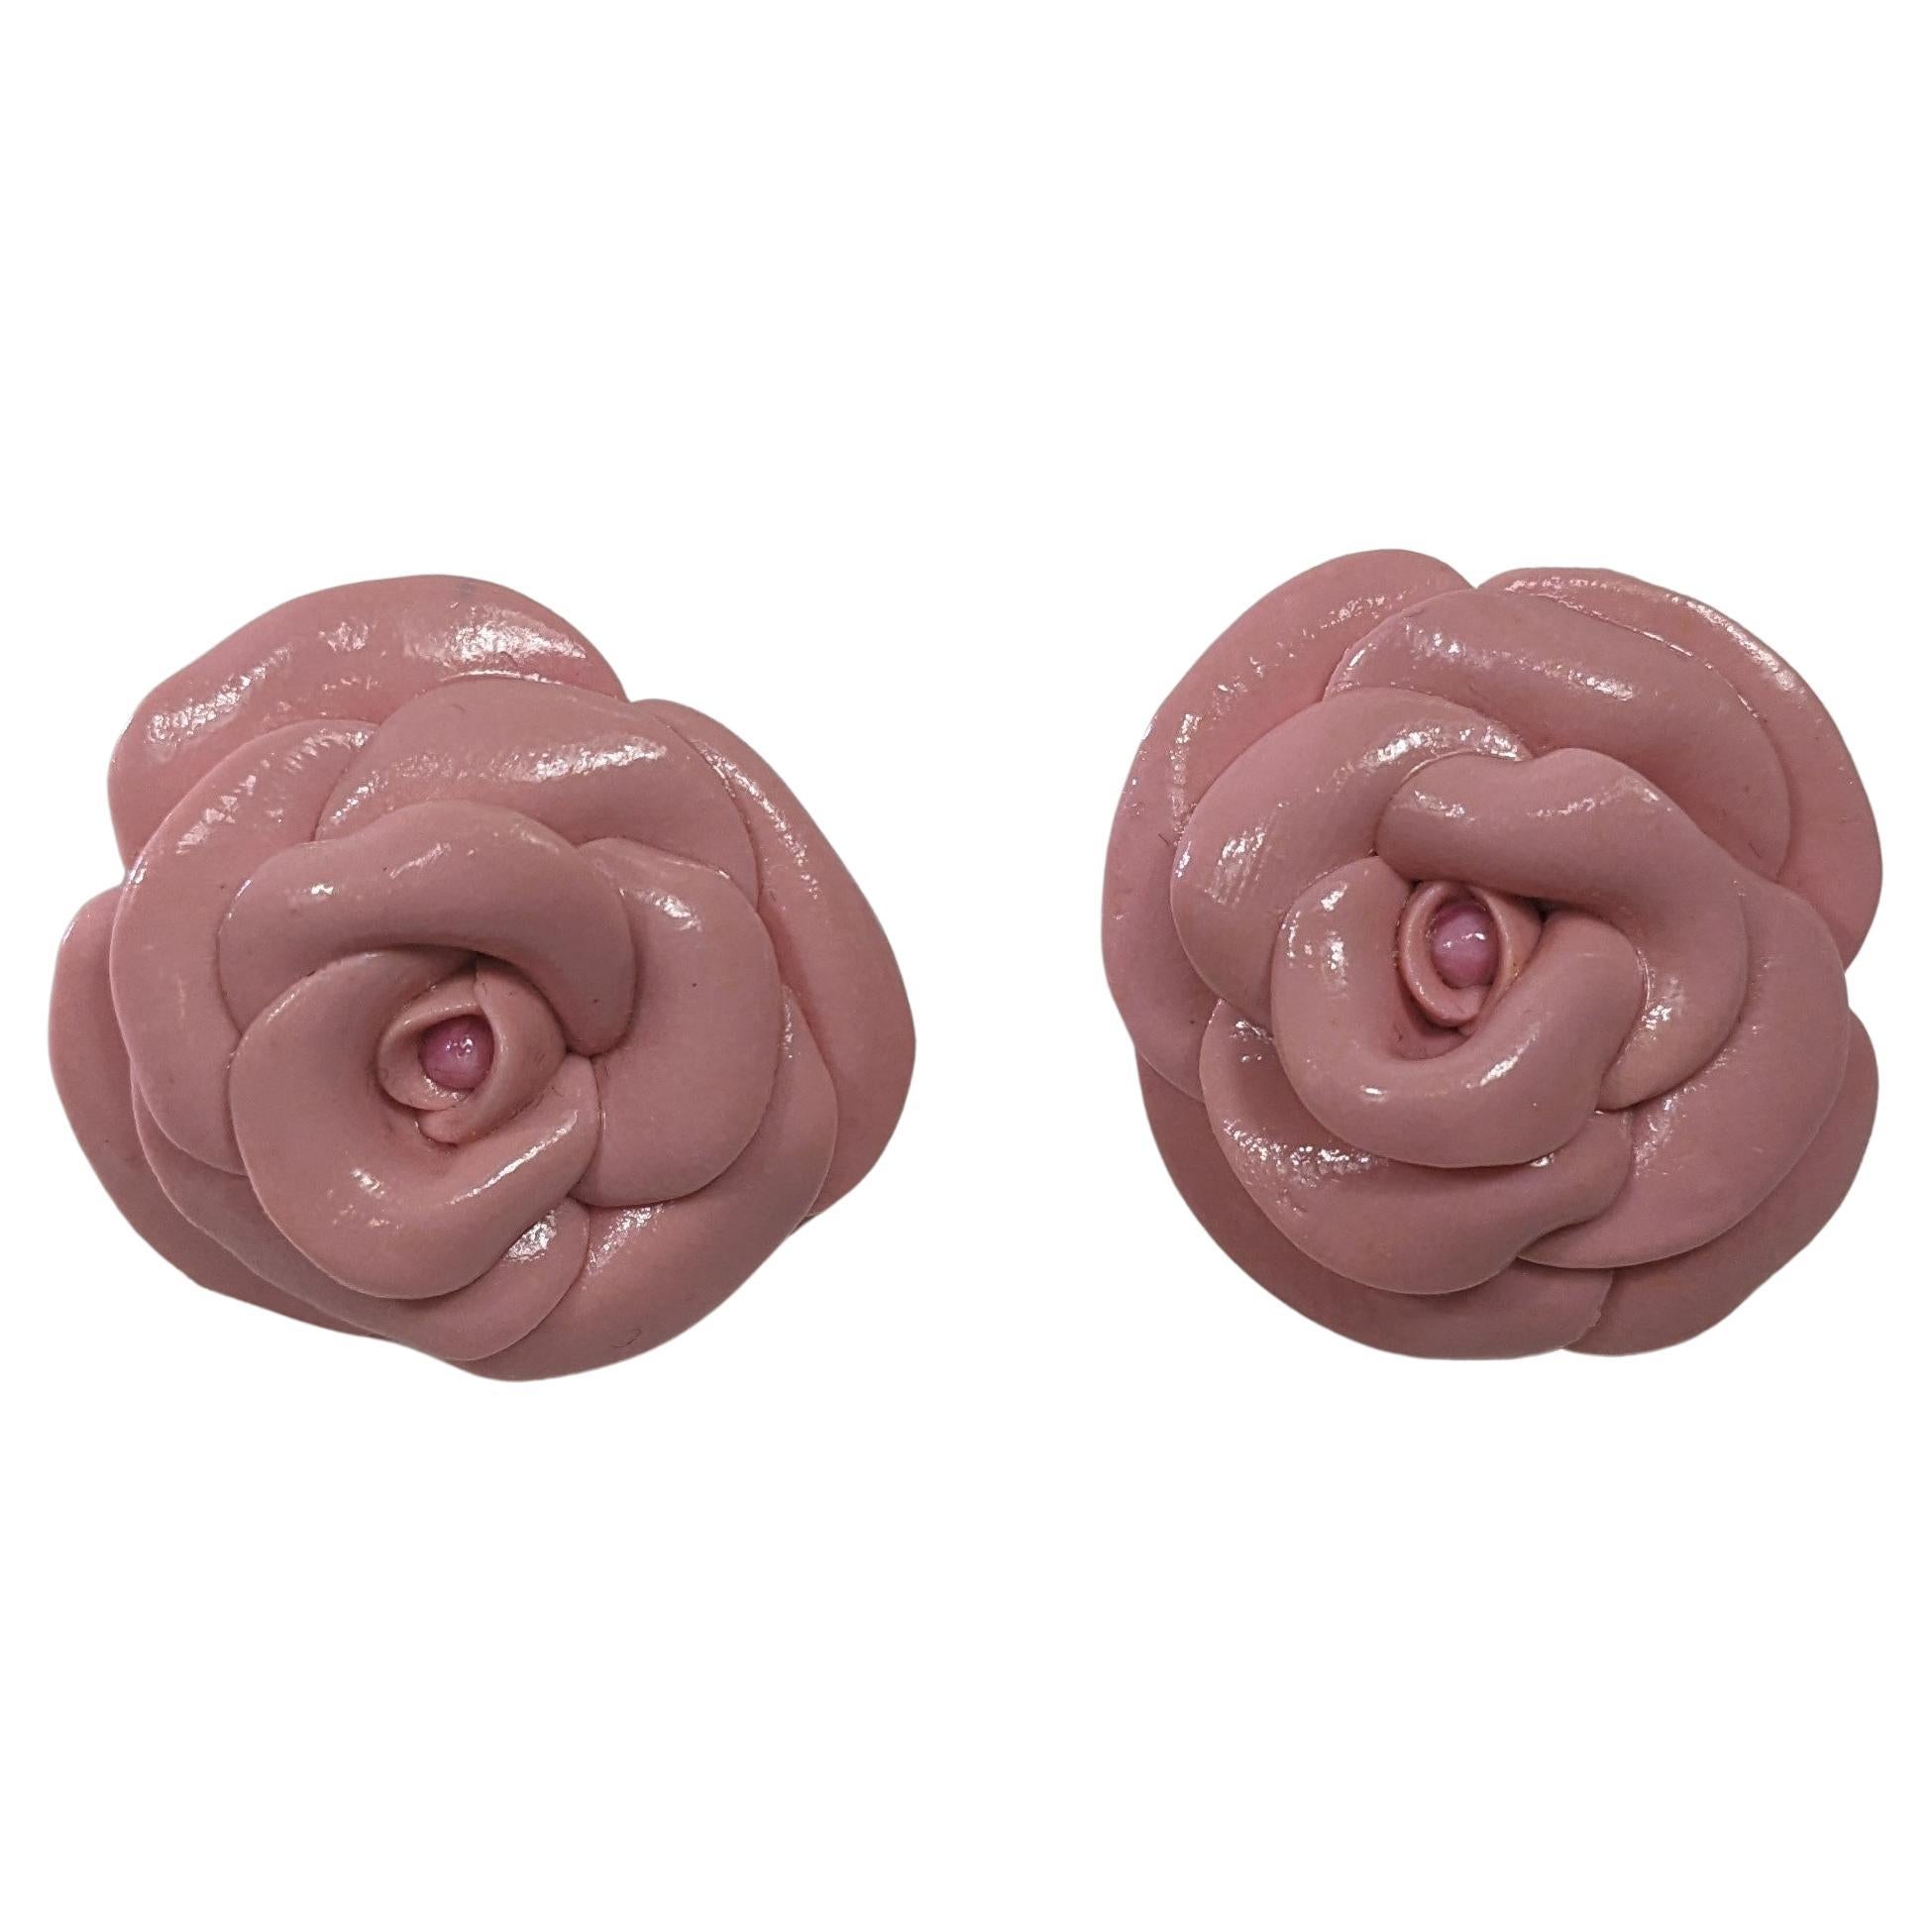  Rose Camelia Polymer  Earrings with golplated silver closure For Sale